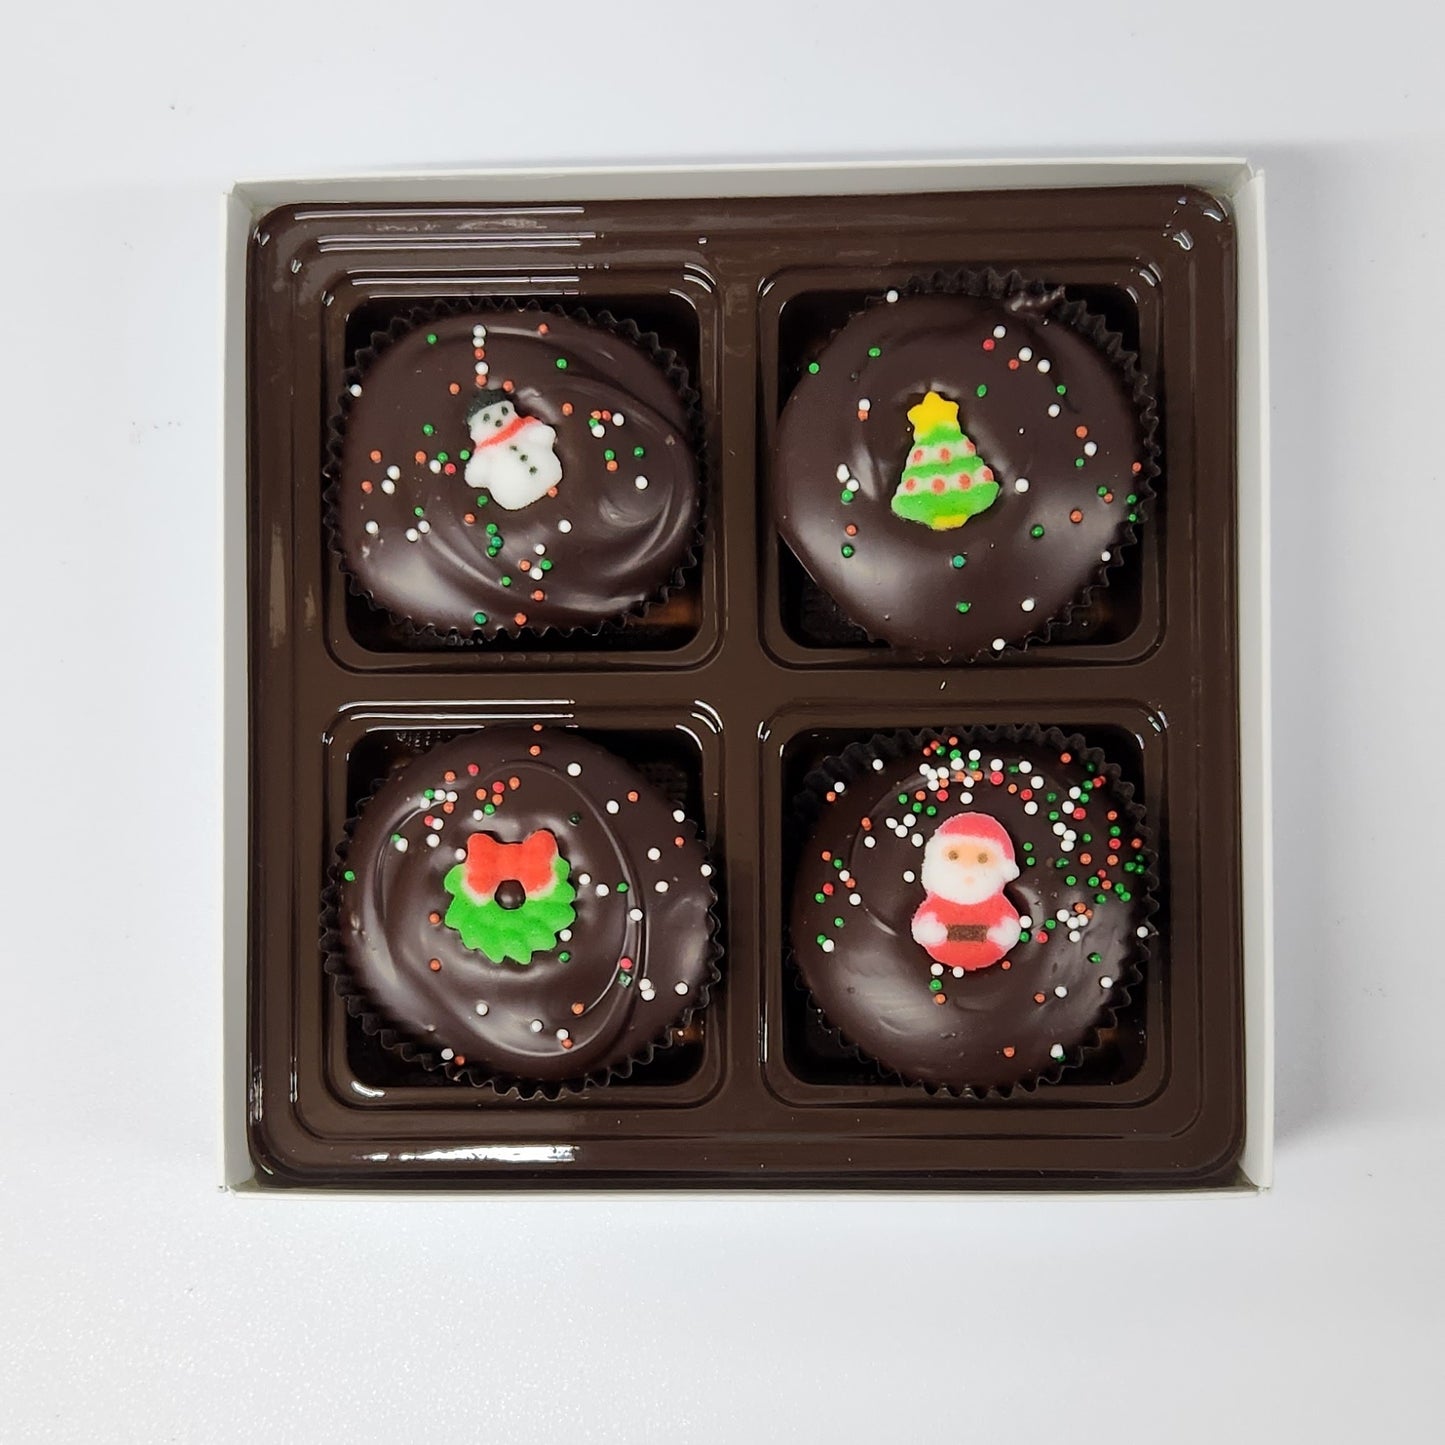 Winter Holiday Peanut Butter Cup Gift Box